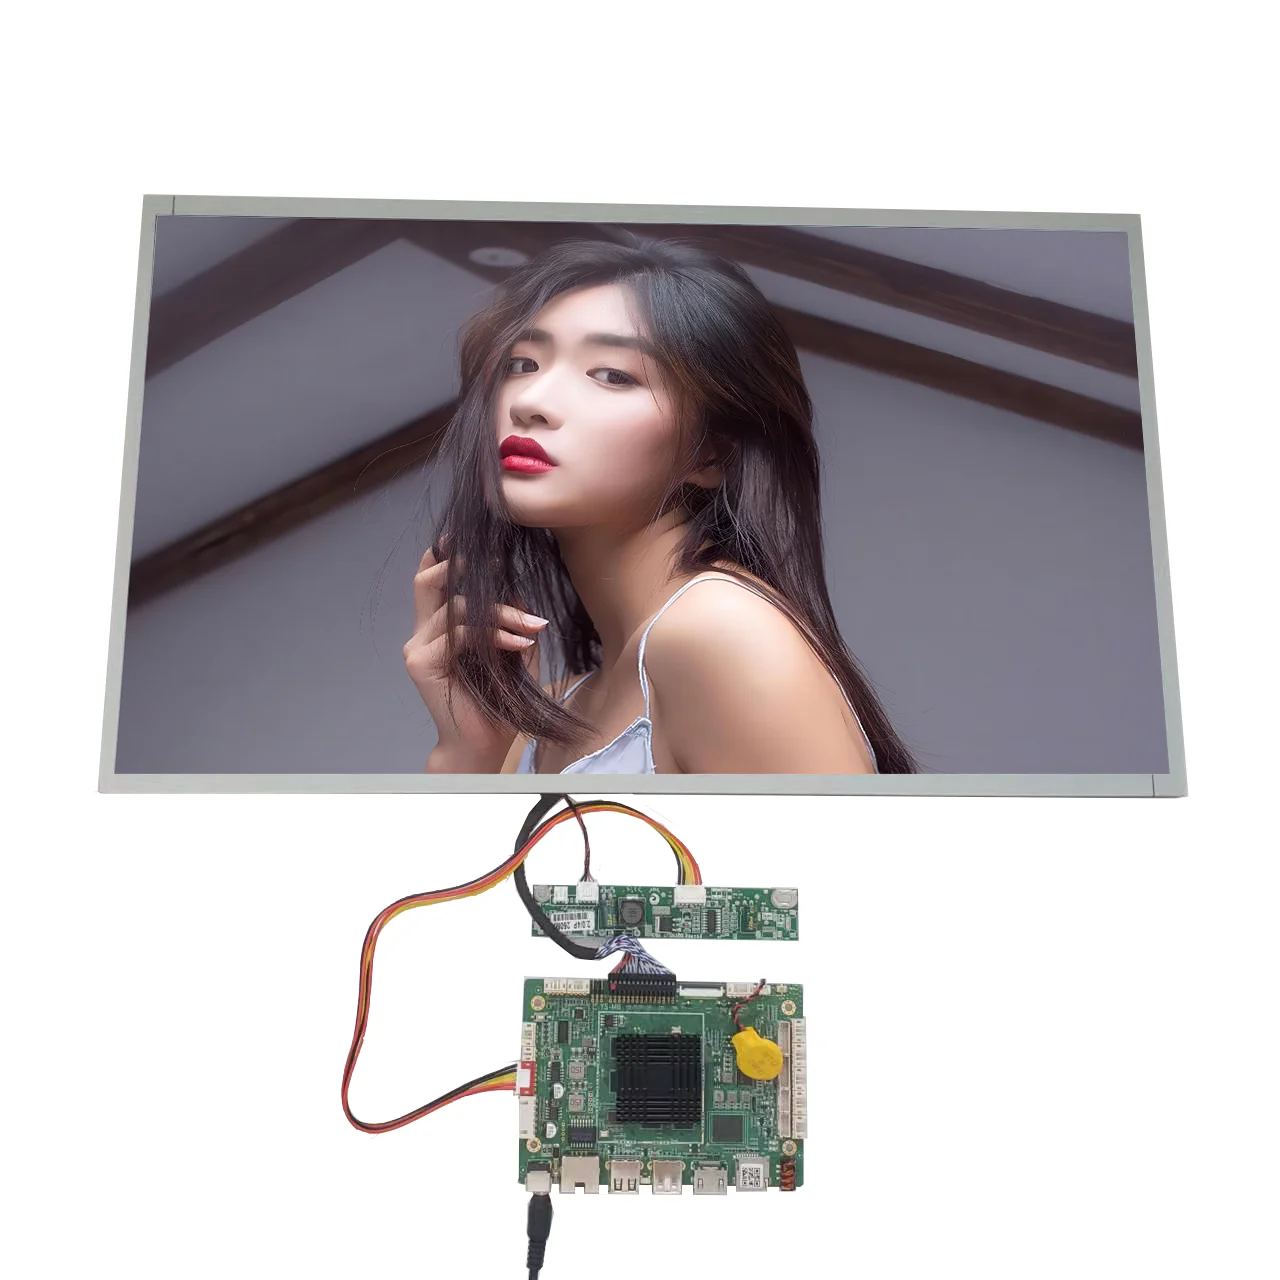 

MG2151B04-3 CSOT 21.5 inch resolution 1920x1080 lcd screen with ys-m8 android board input LVDS speaker output